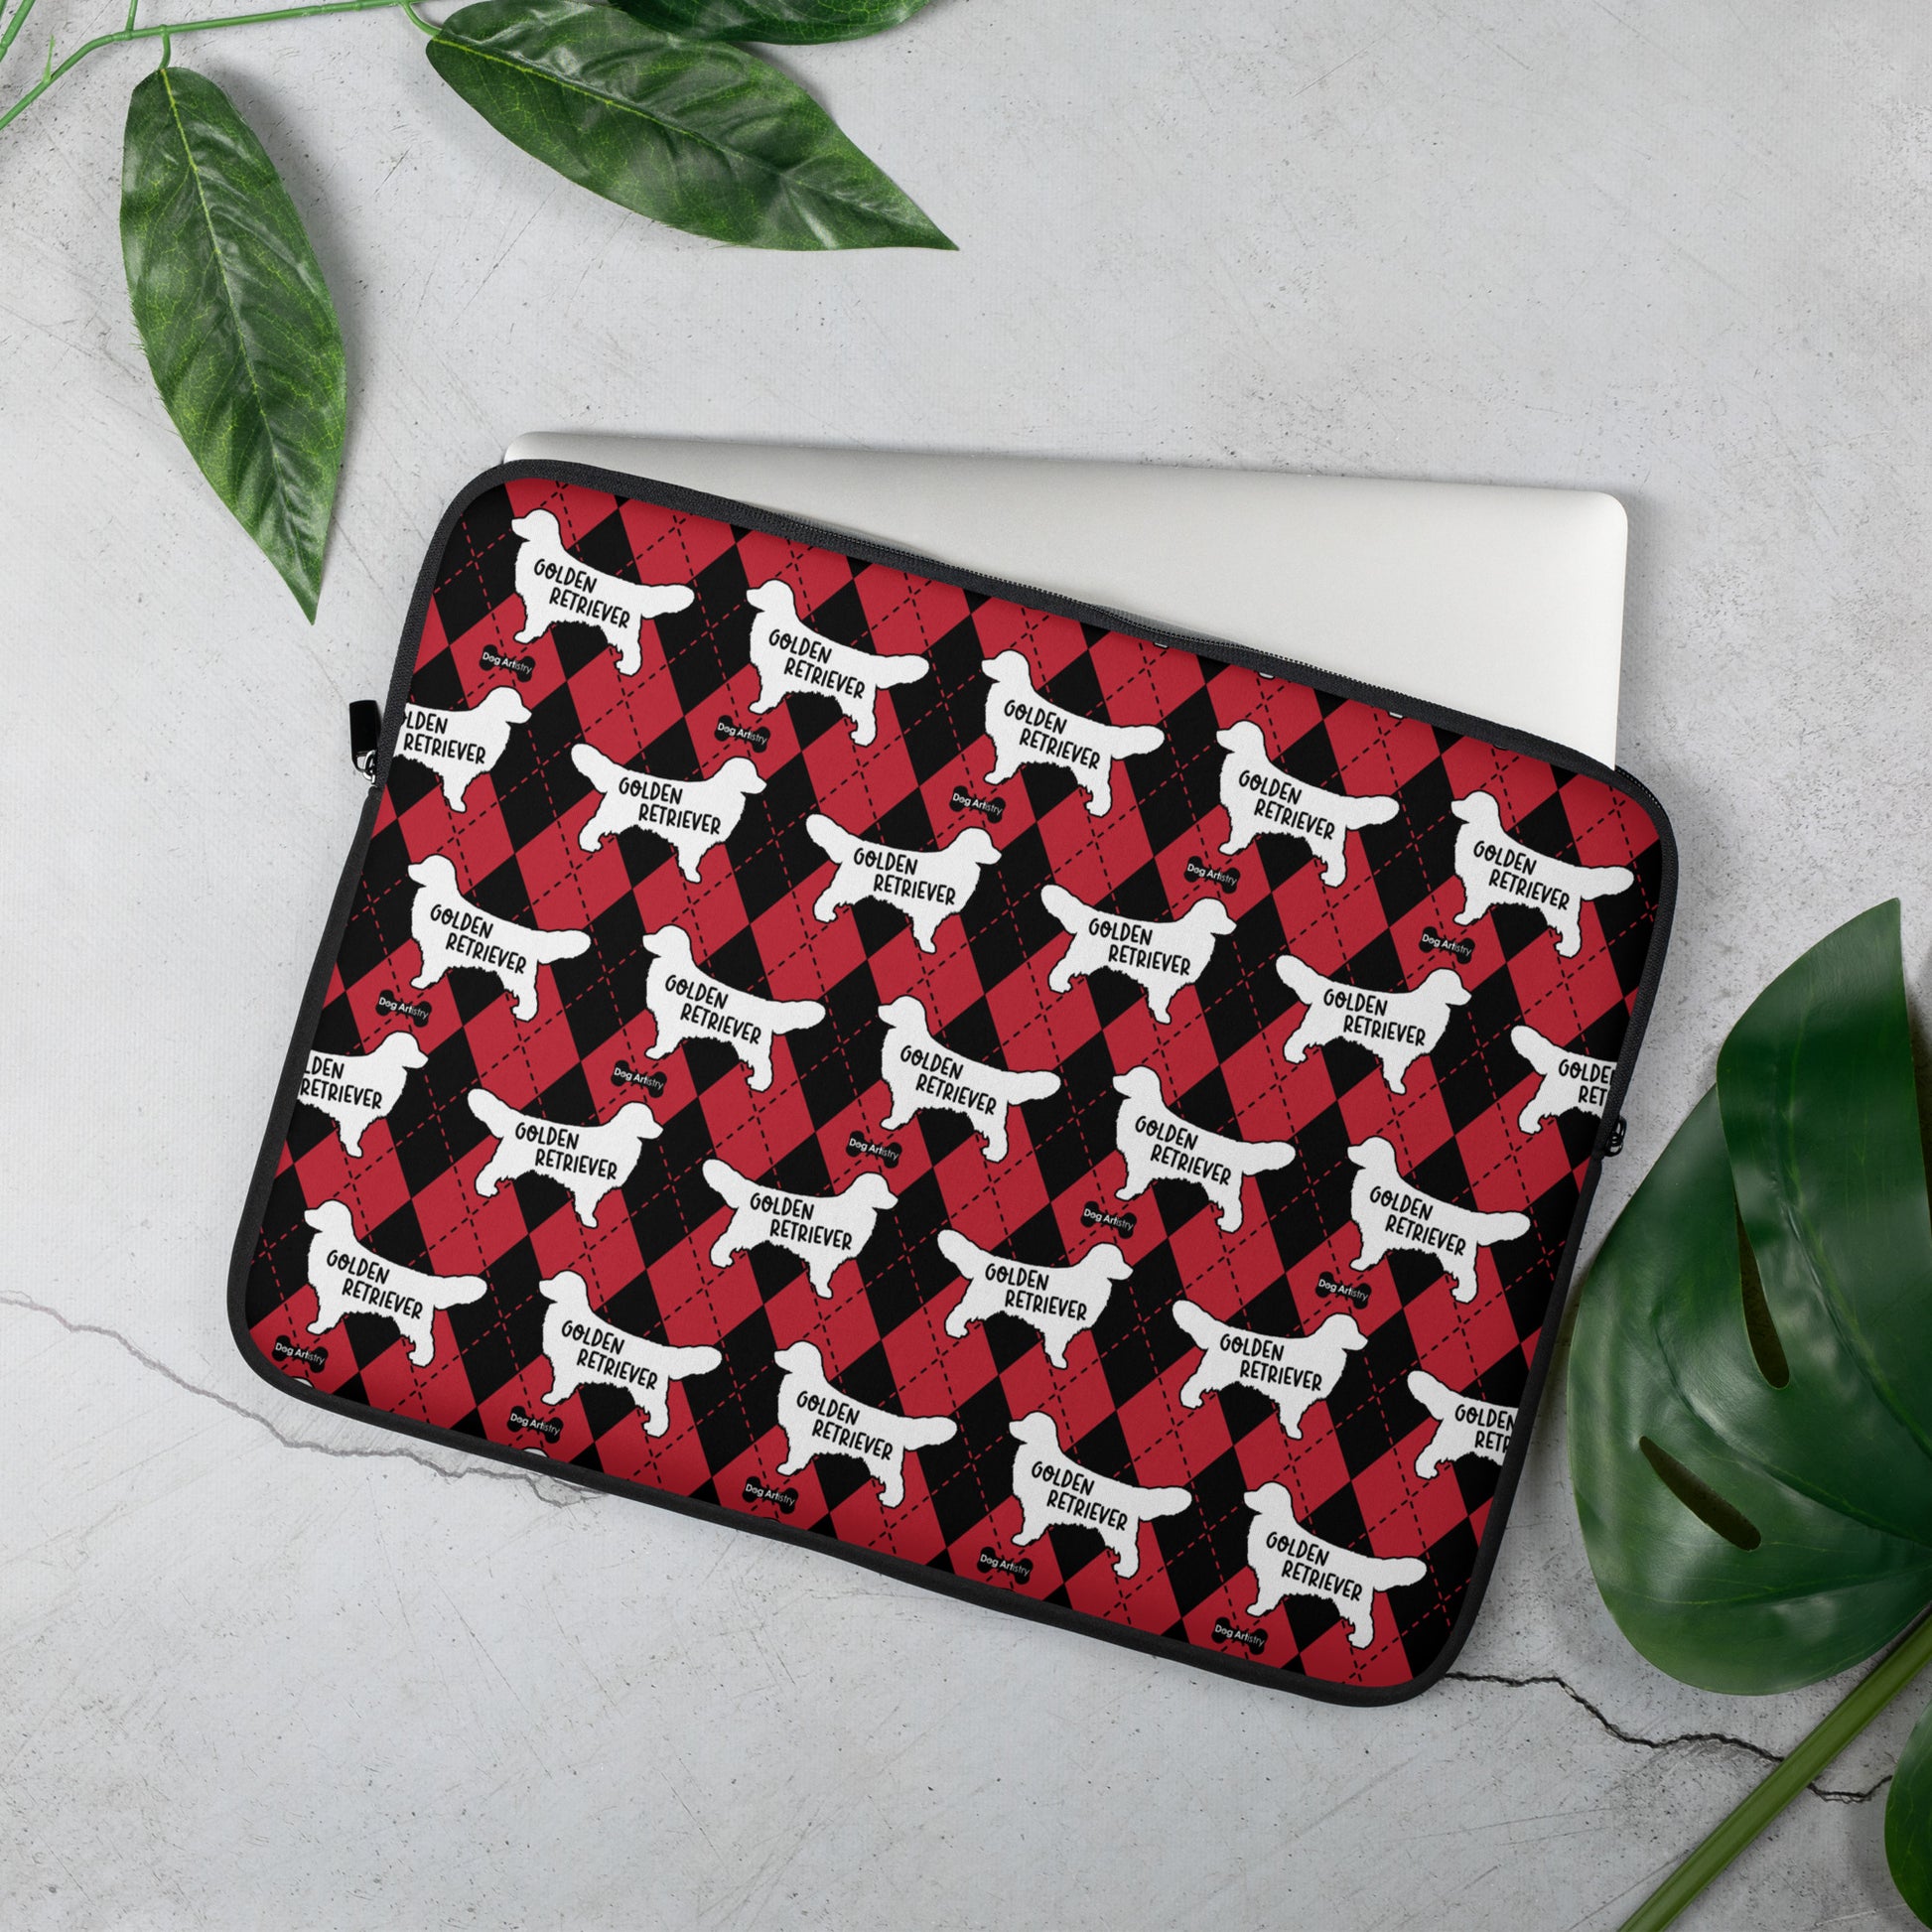 Golden Retriever red and black argyle laptop sleeve by Dog Artistry